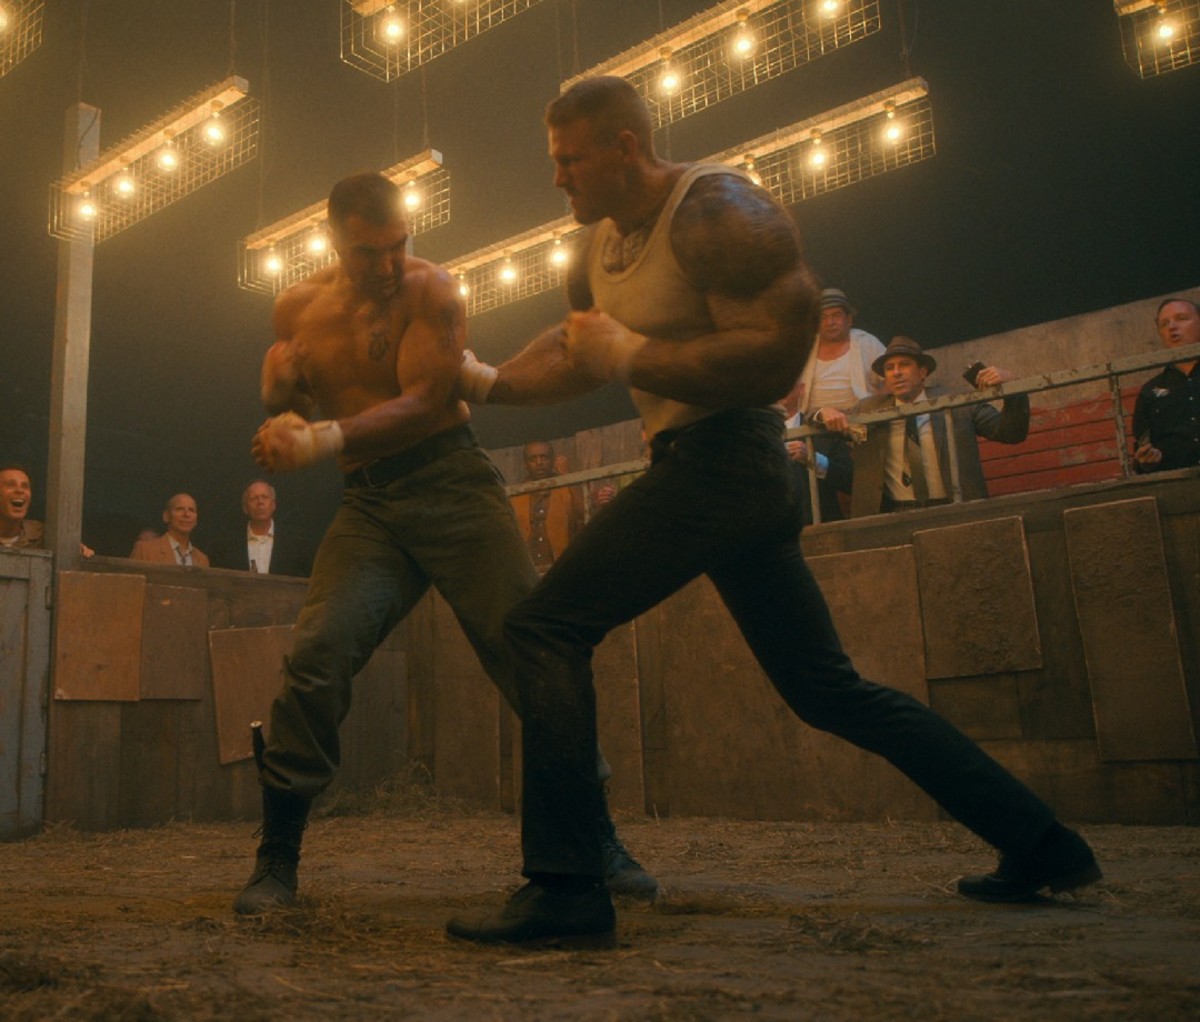 The Umbrella Academy star Tom Hopper fights an opponent with onlookers